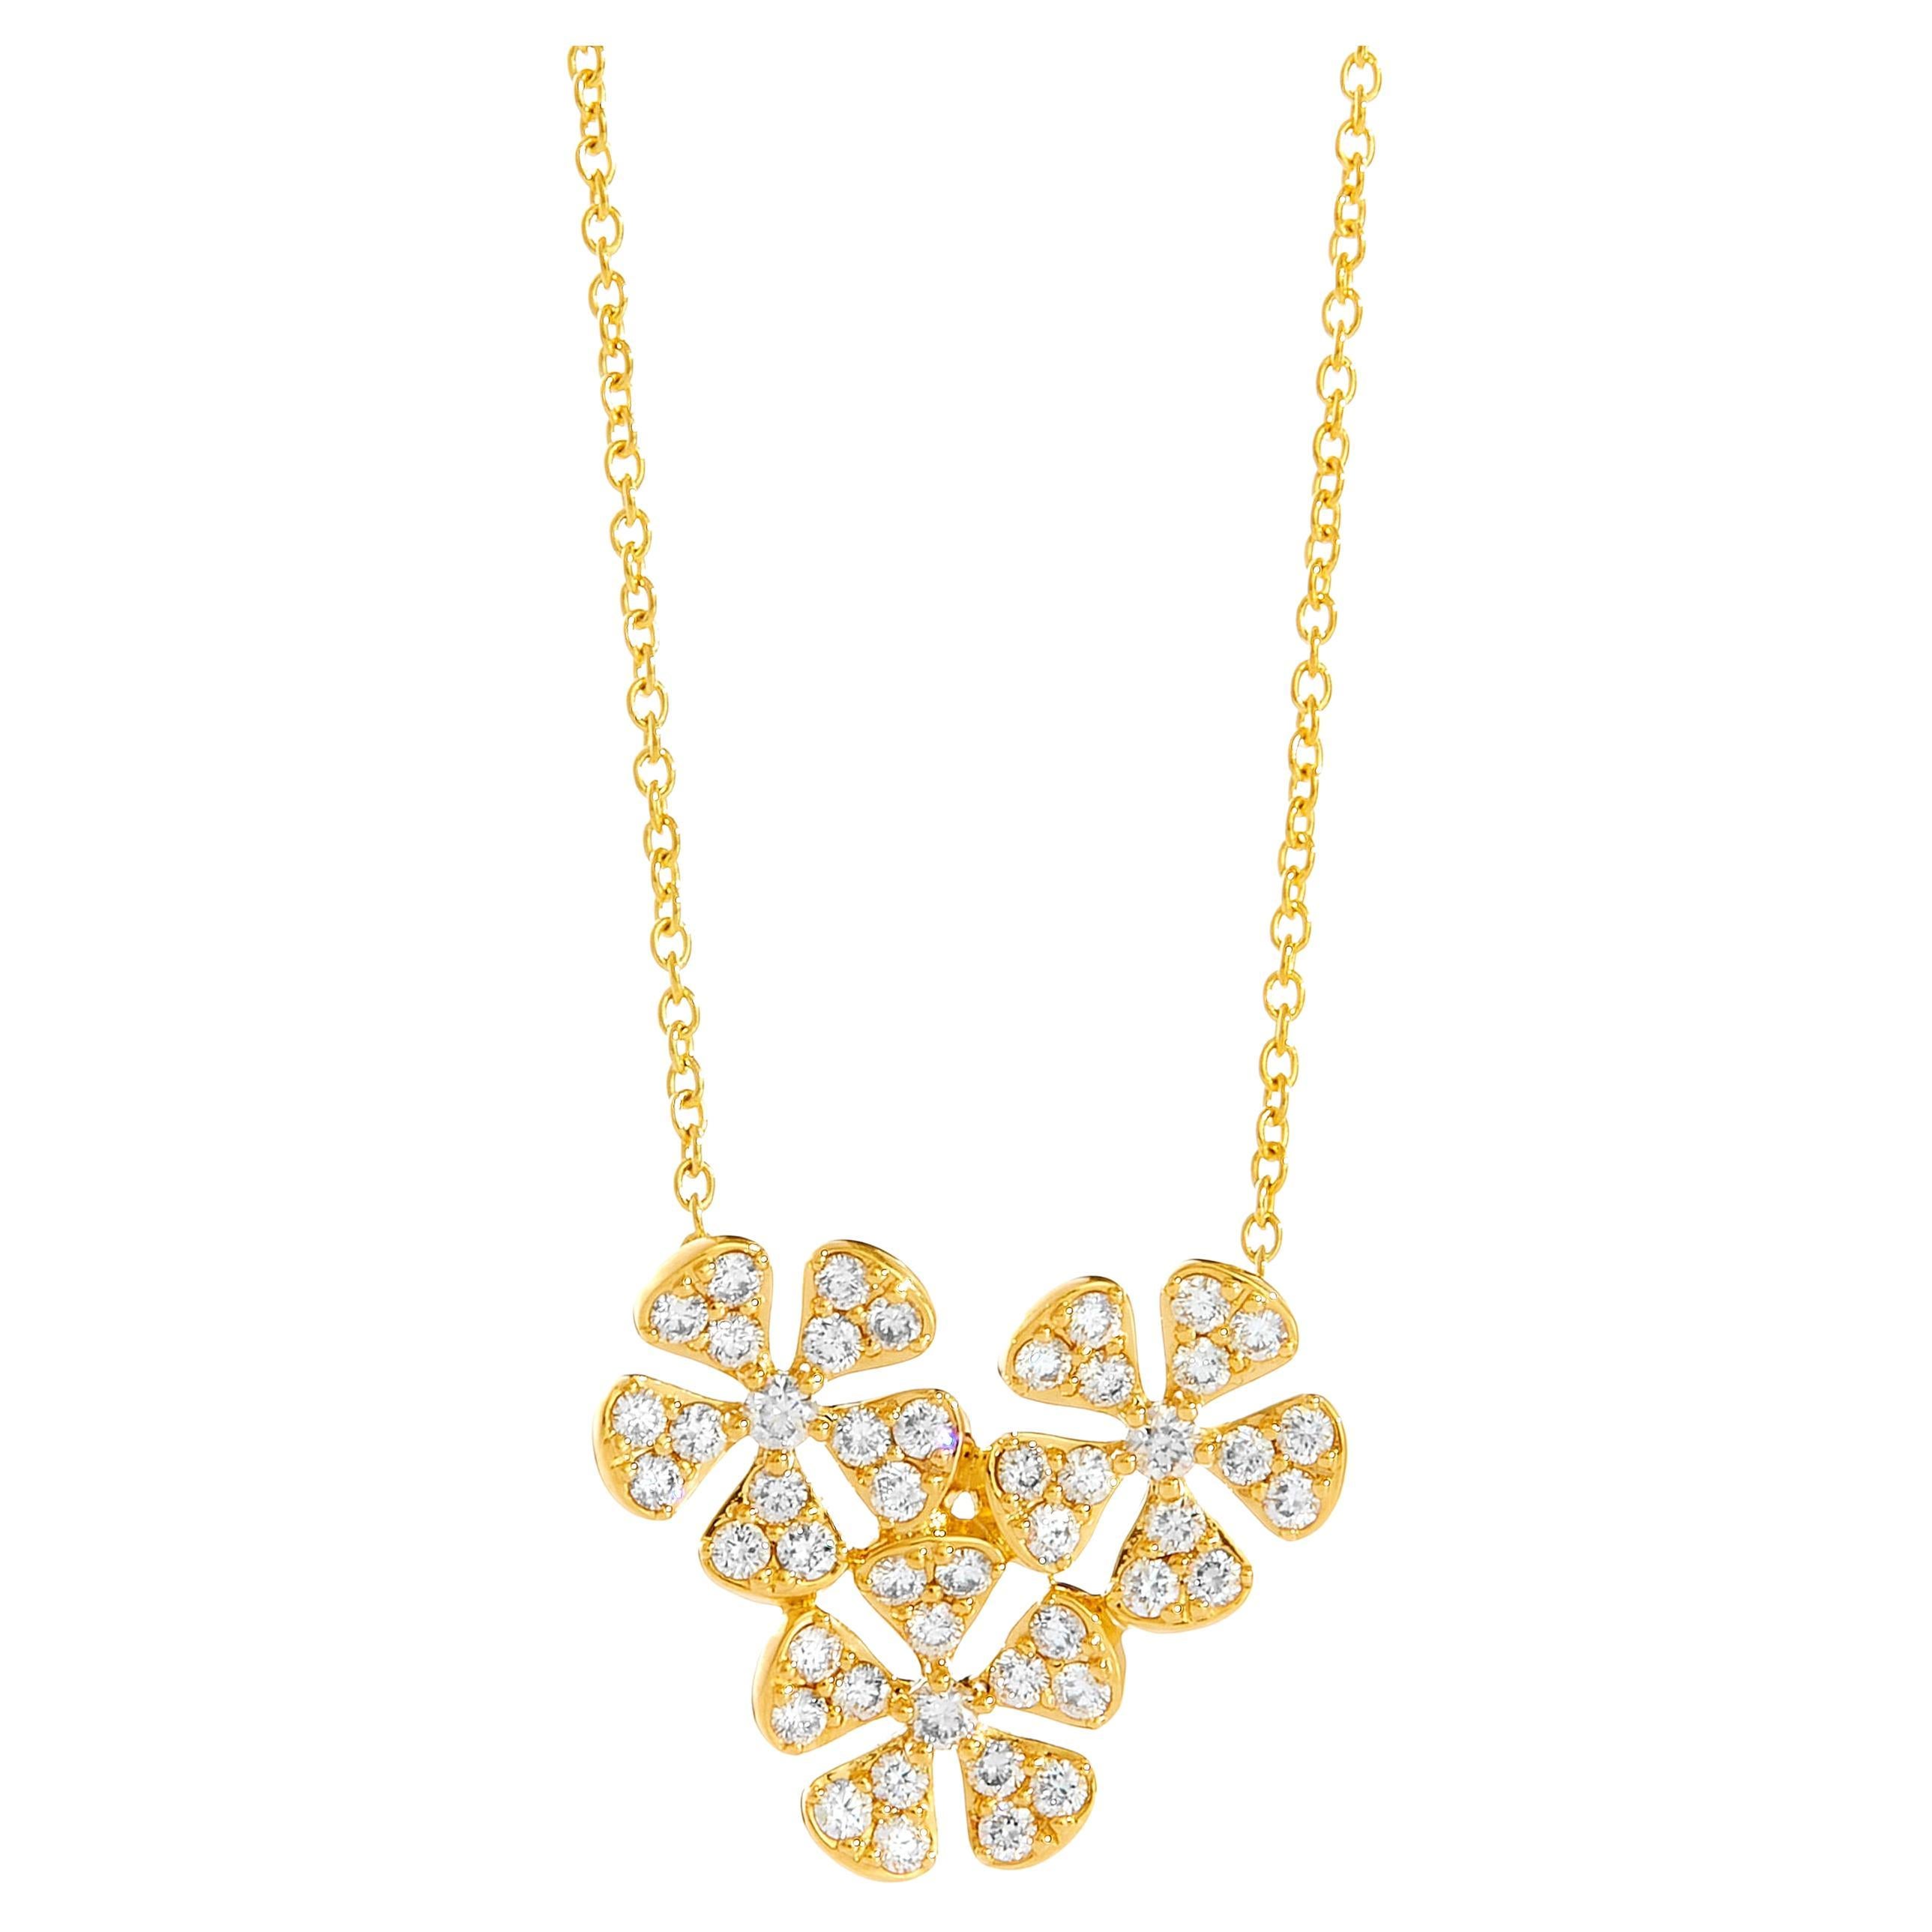 Syna Yellow Gold Flower Necklace with Diamonds